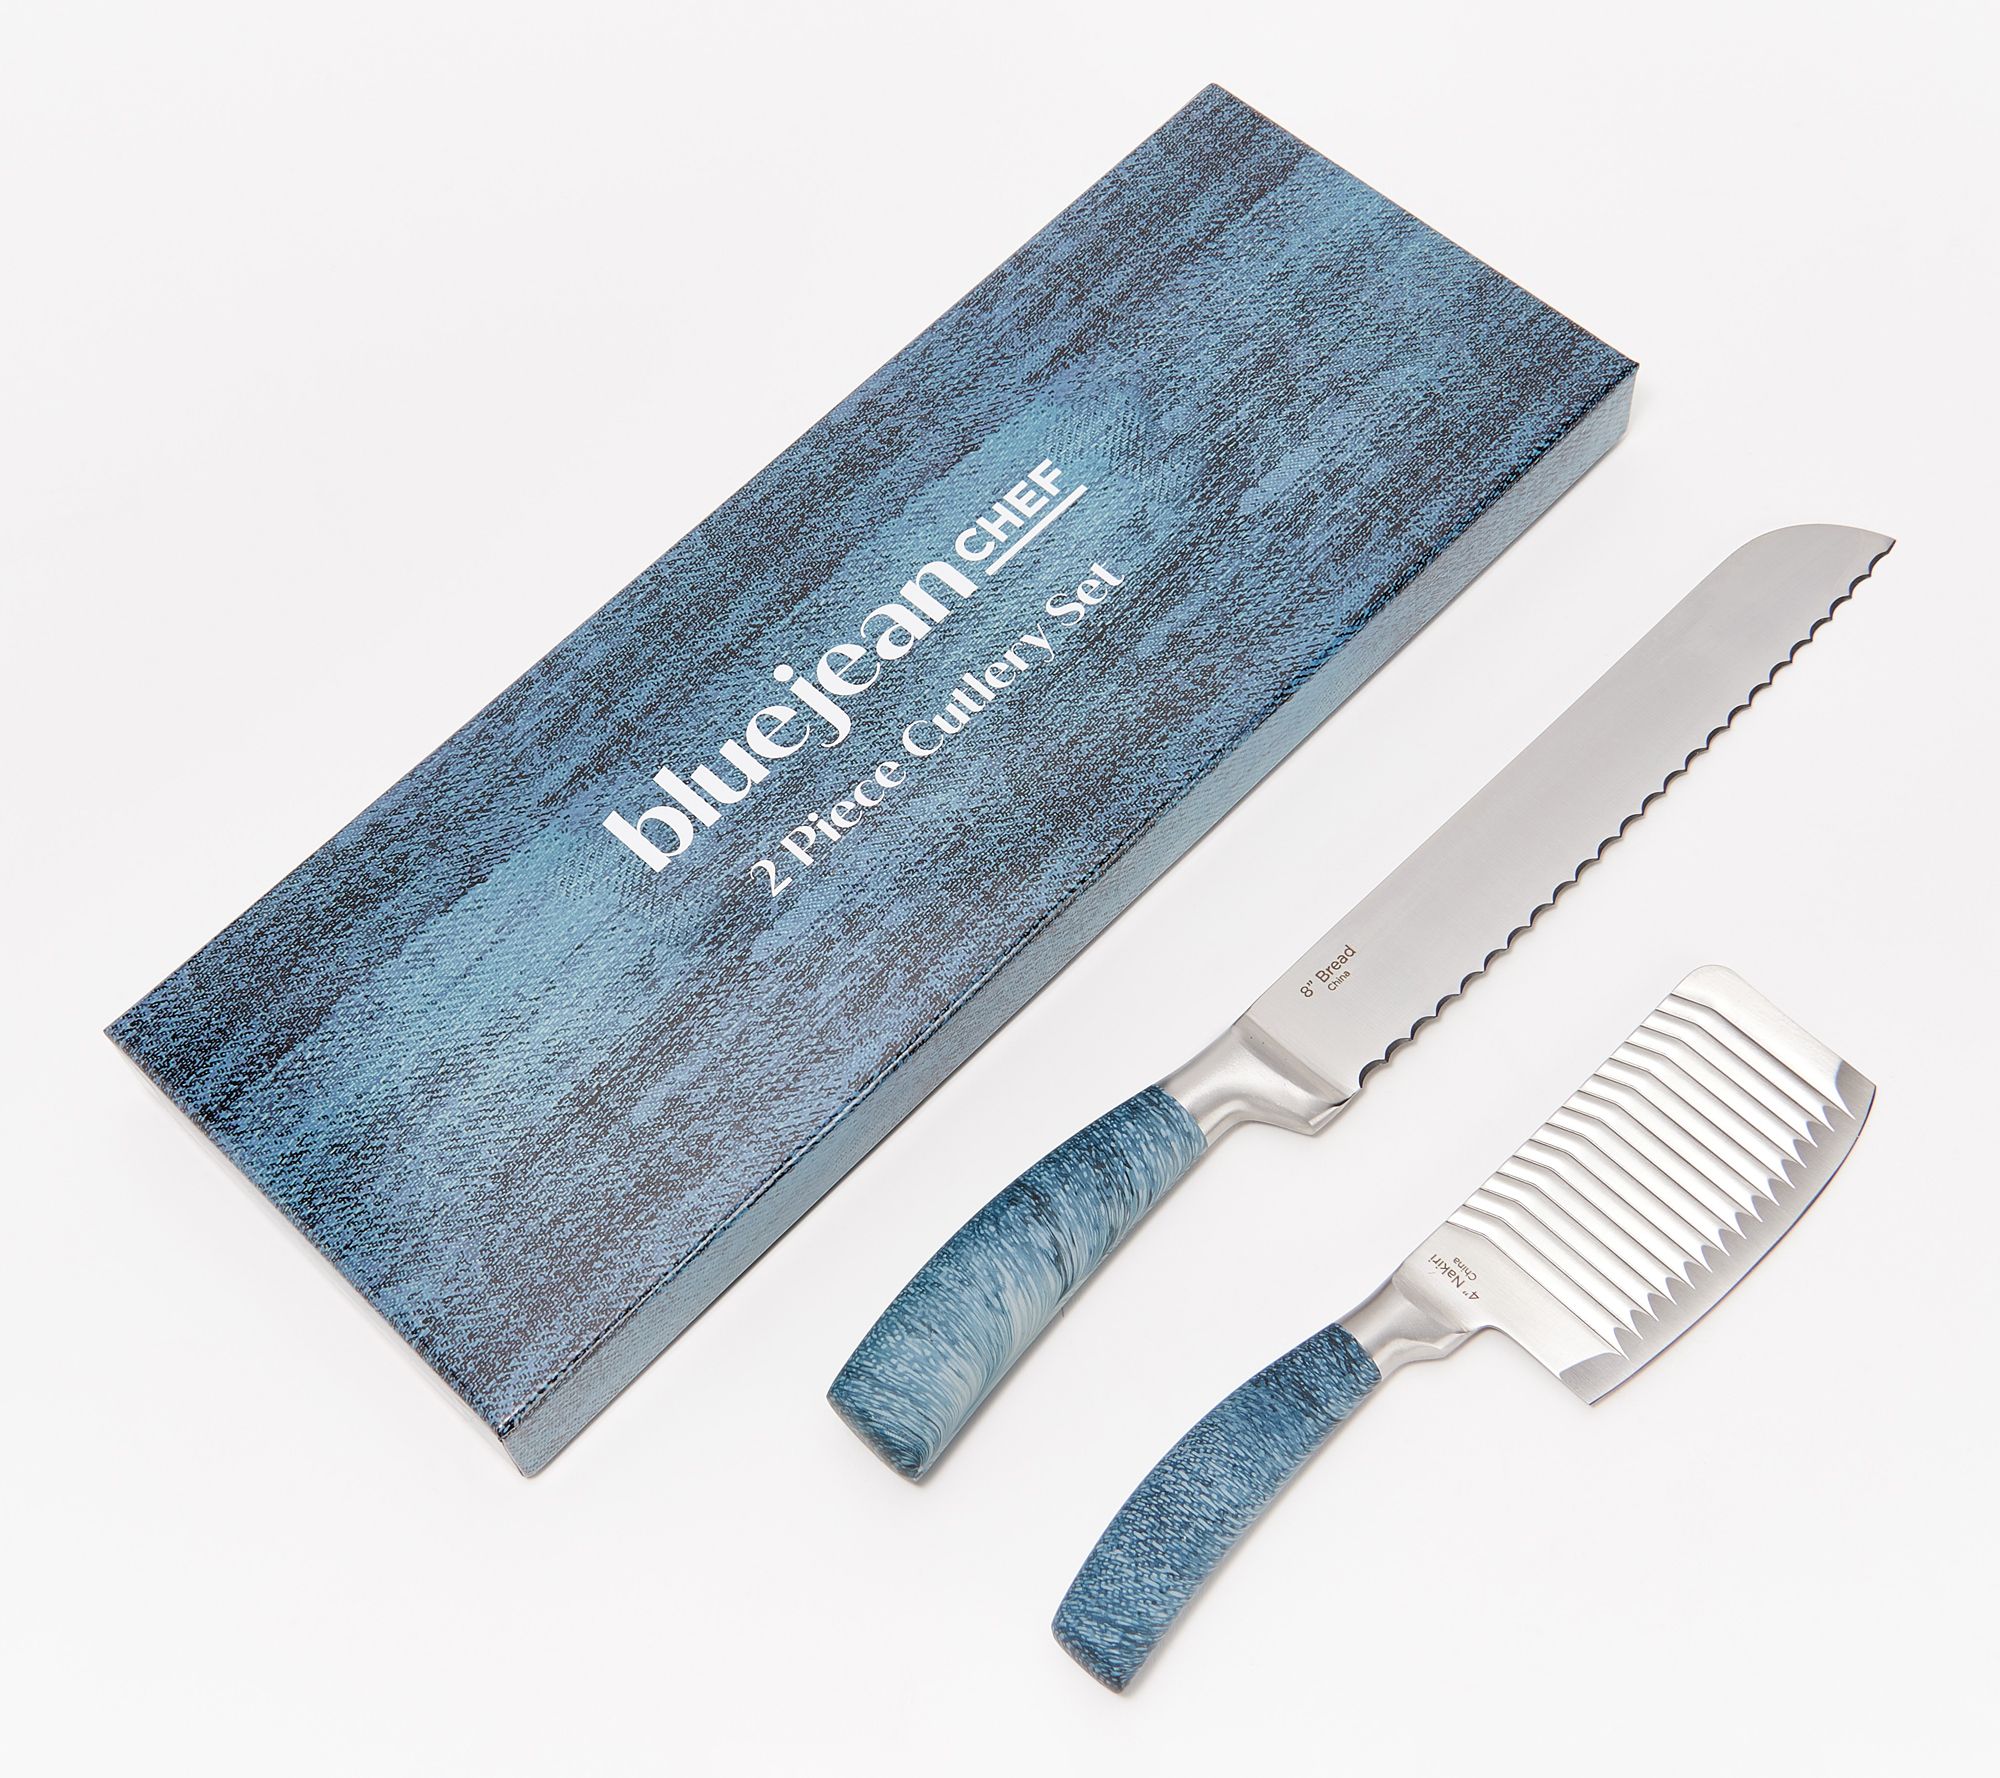 Forged in Fire 2 Pieces Chef Knife Set, As Seen on TV + FREE